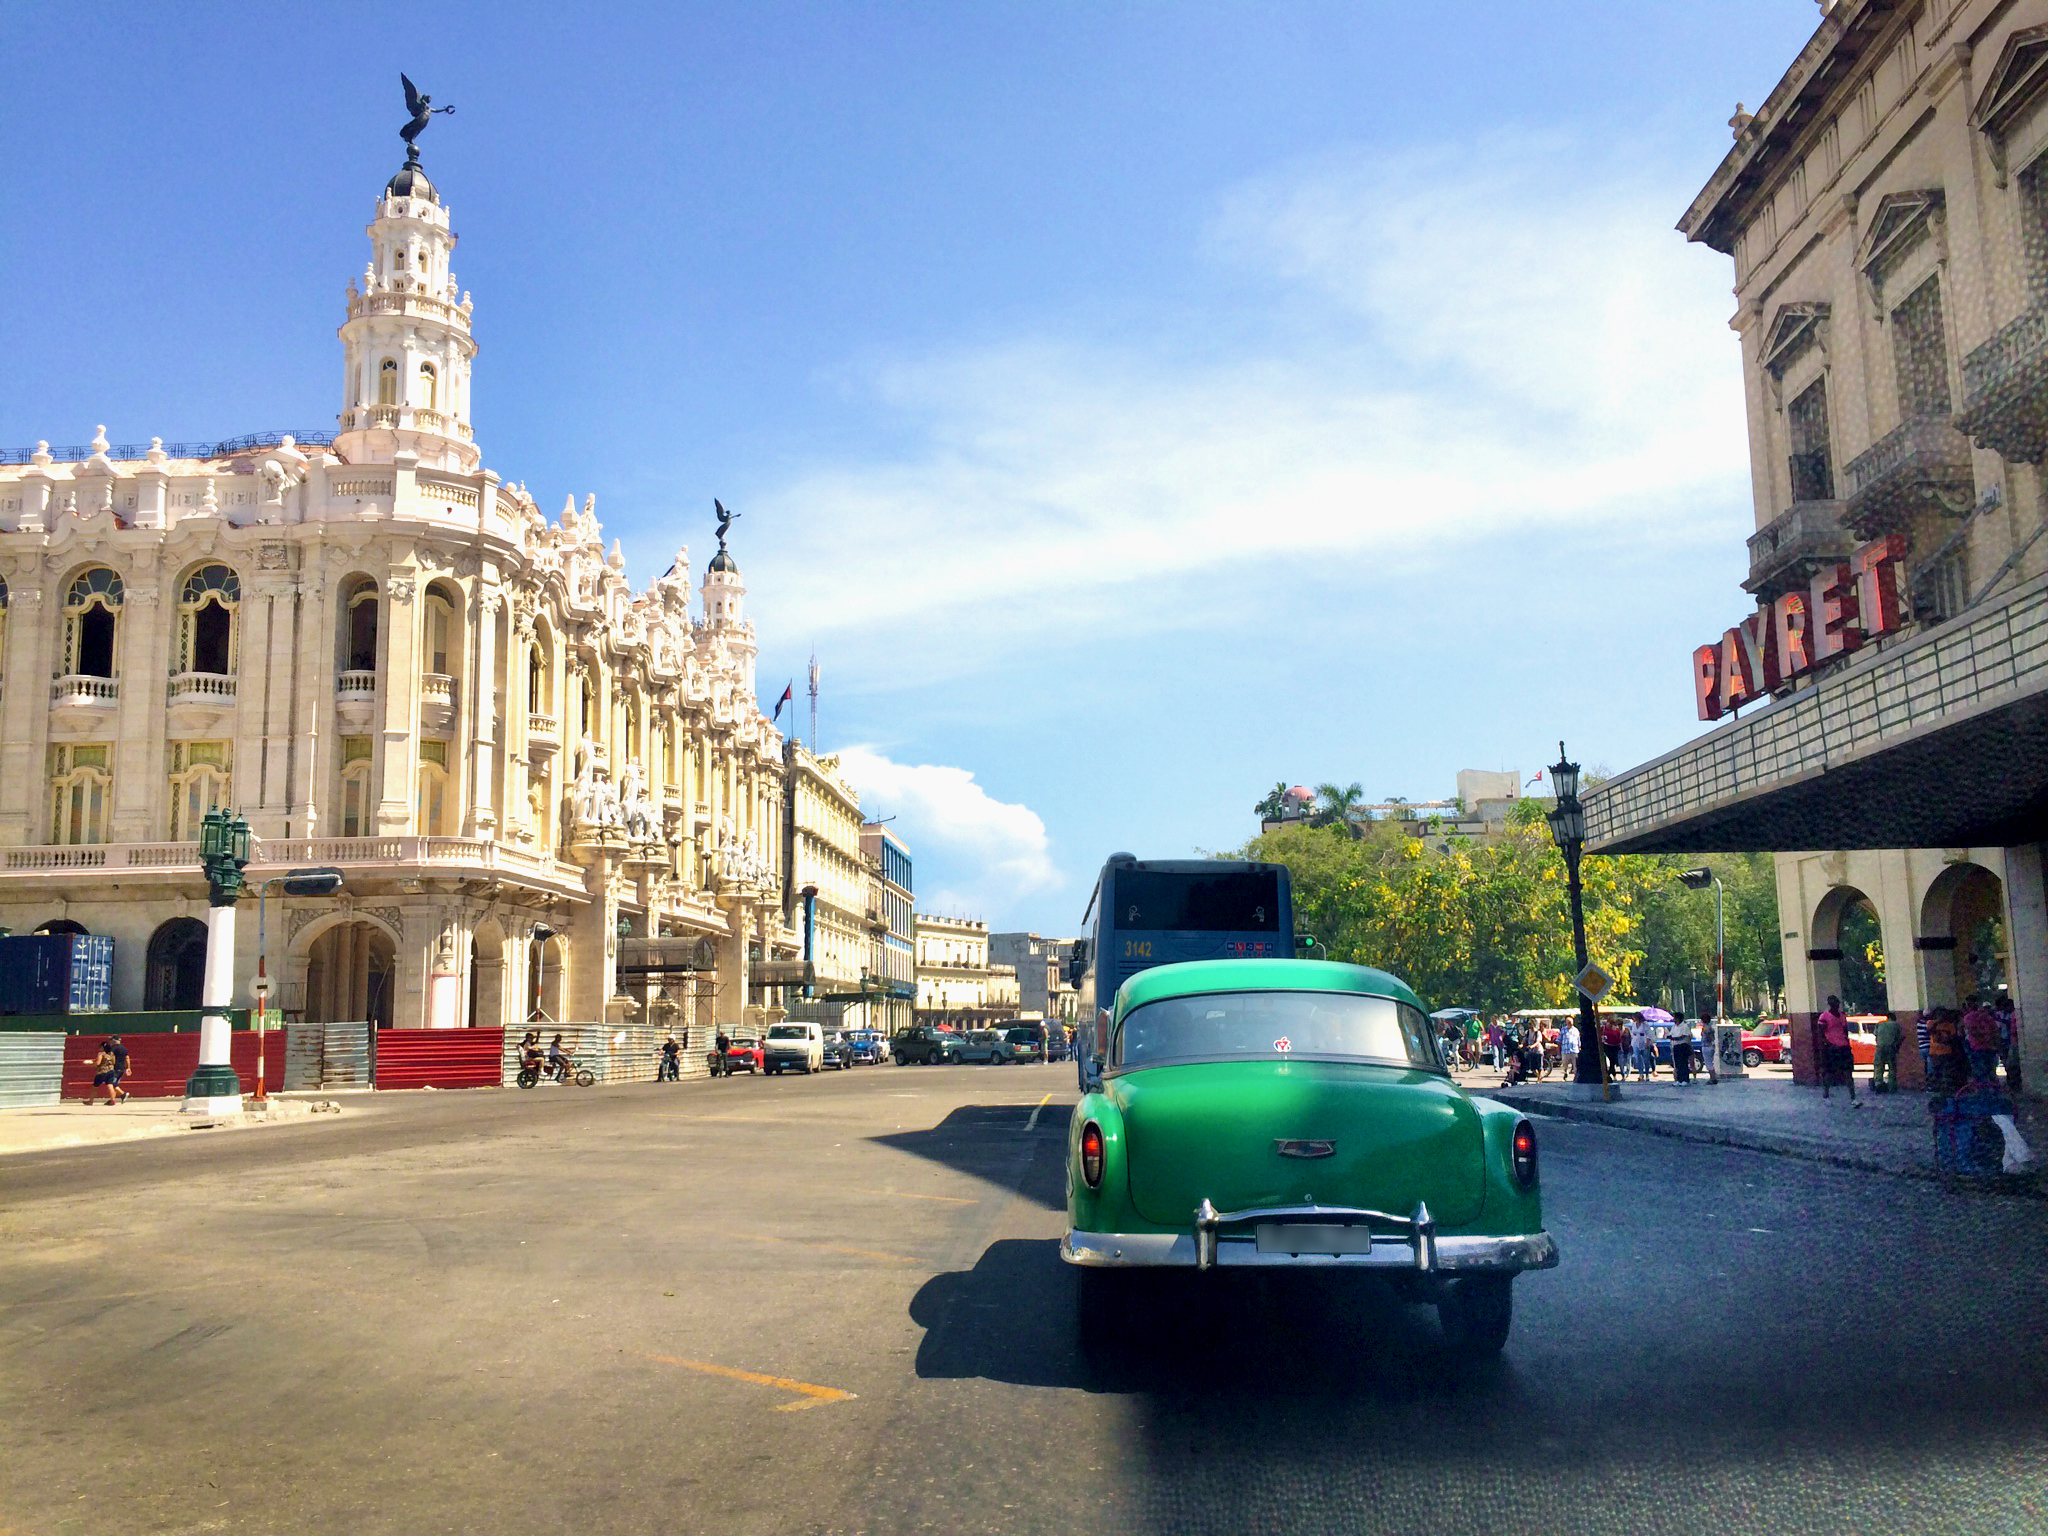  CUBA- Havana Calle.
(Photo Credit: National Geographic Channels) 